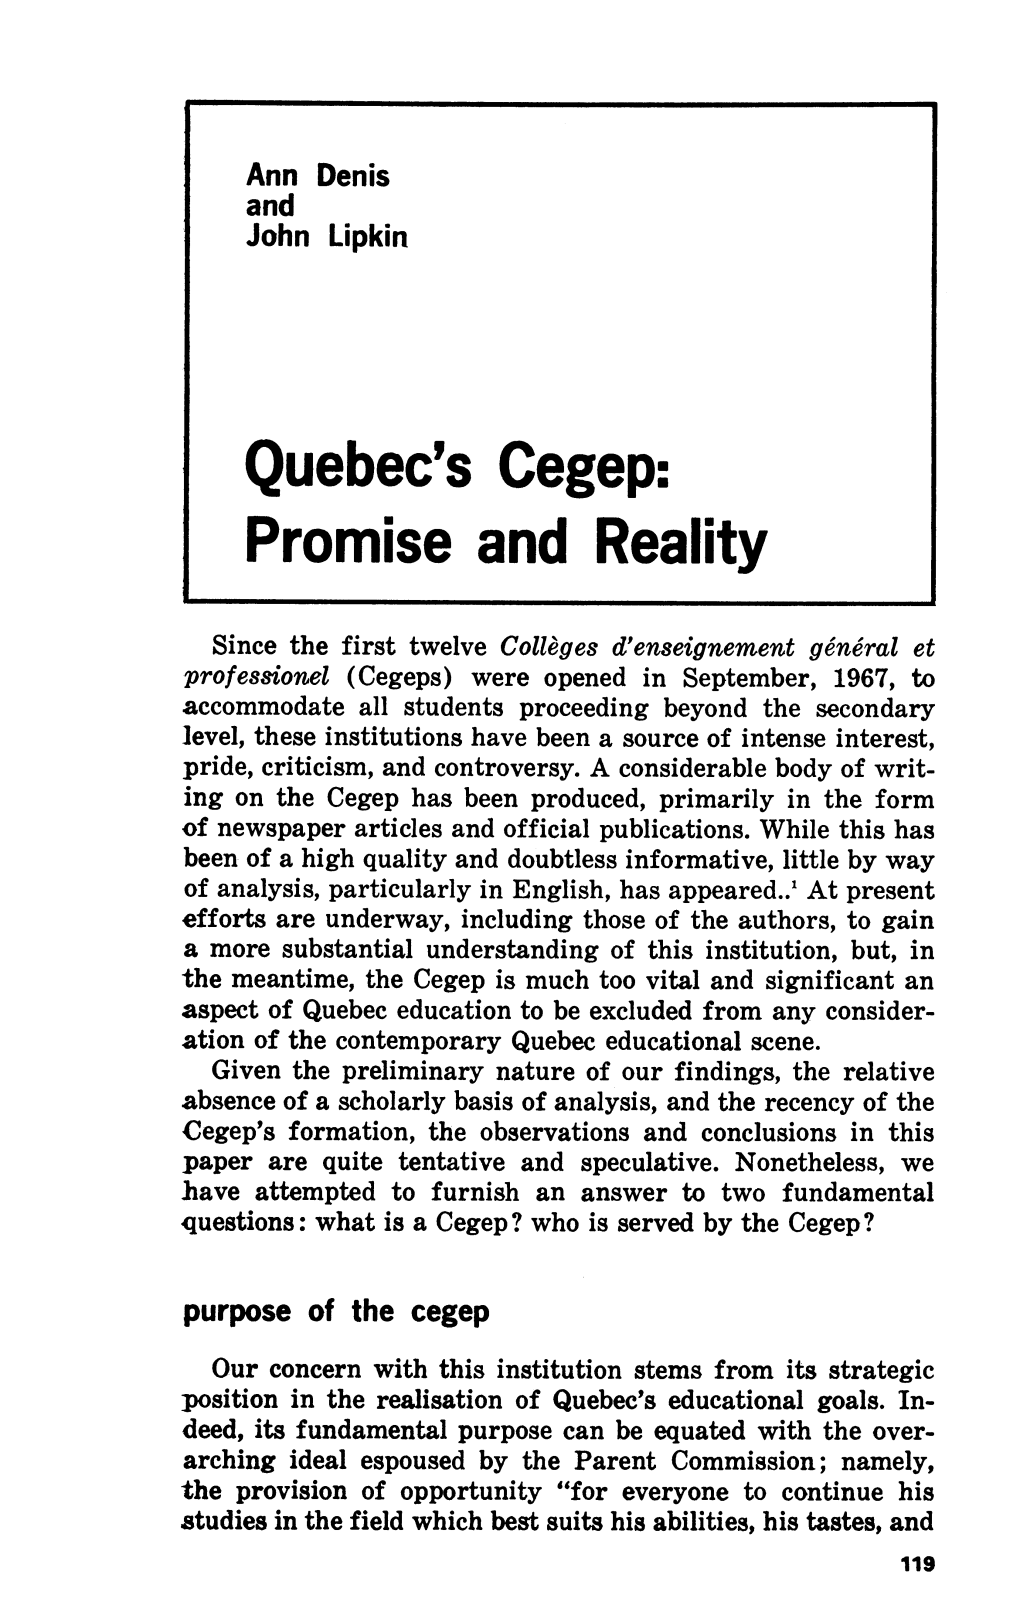 Quebec's Cegep: Promise and Reality